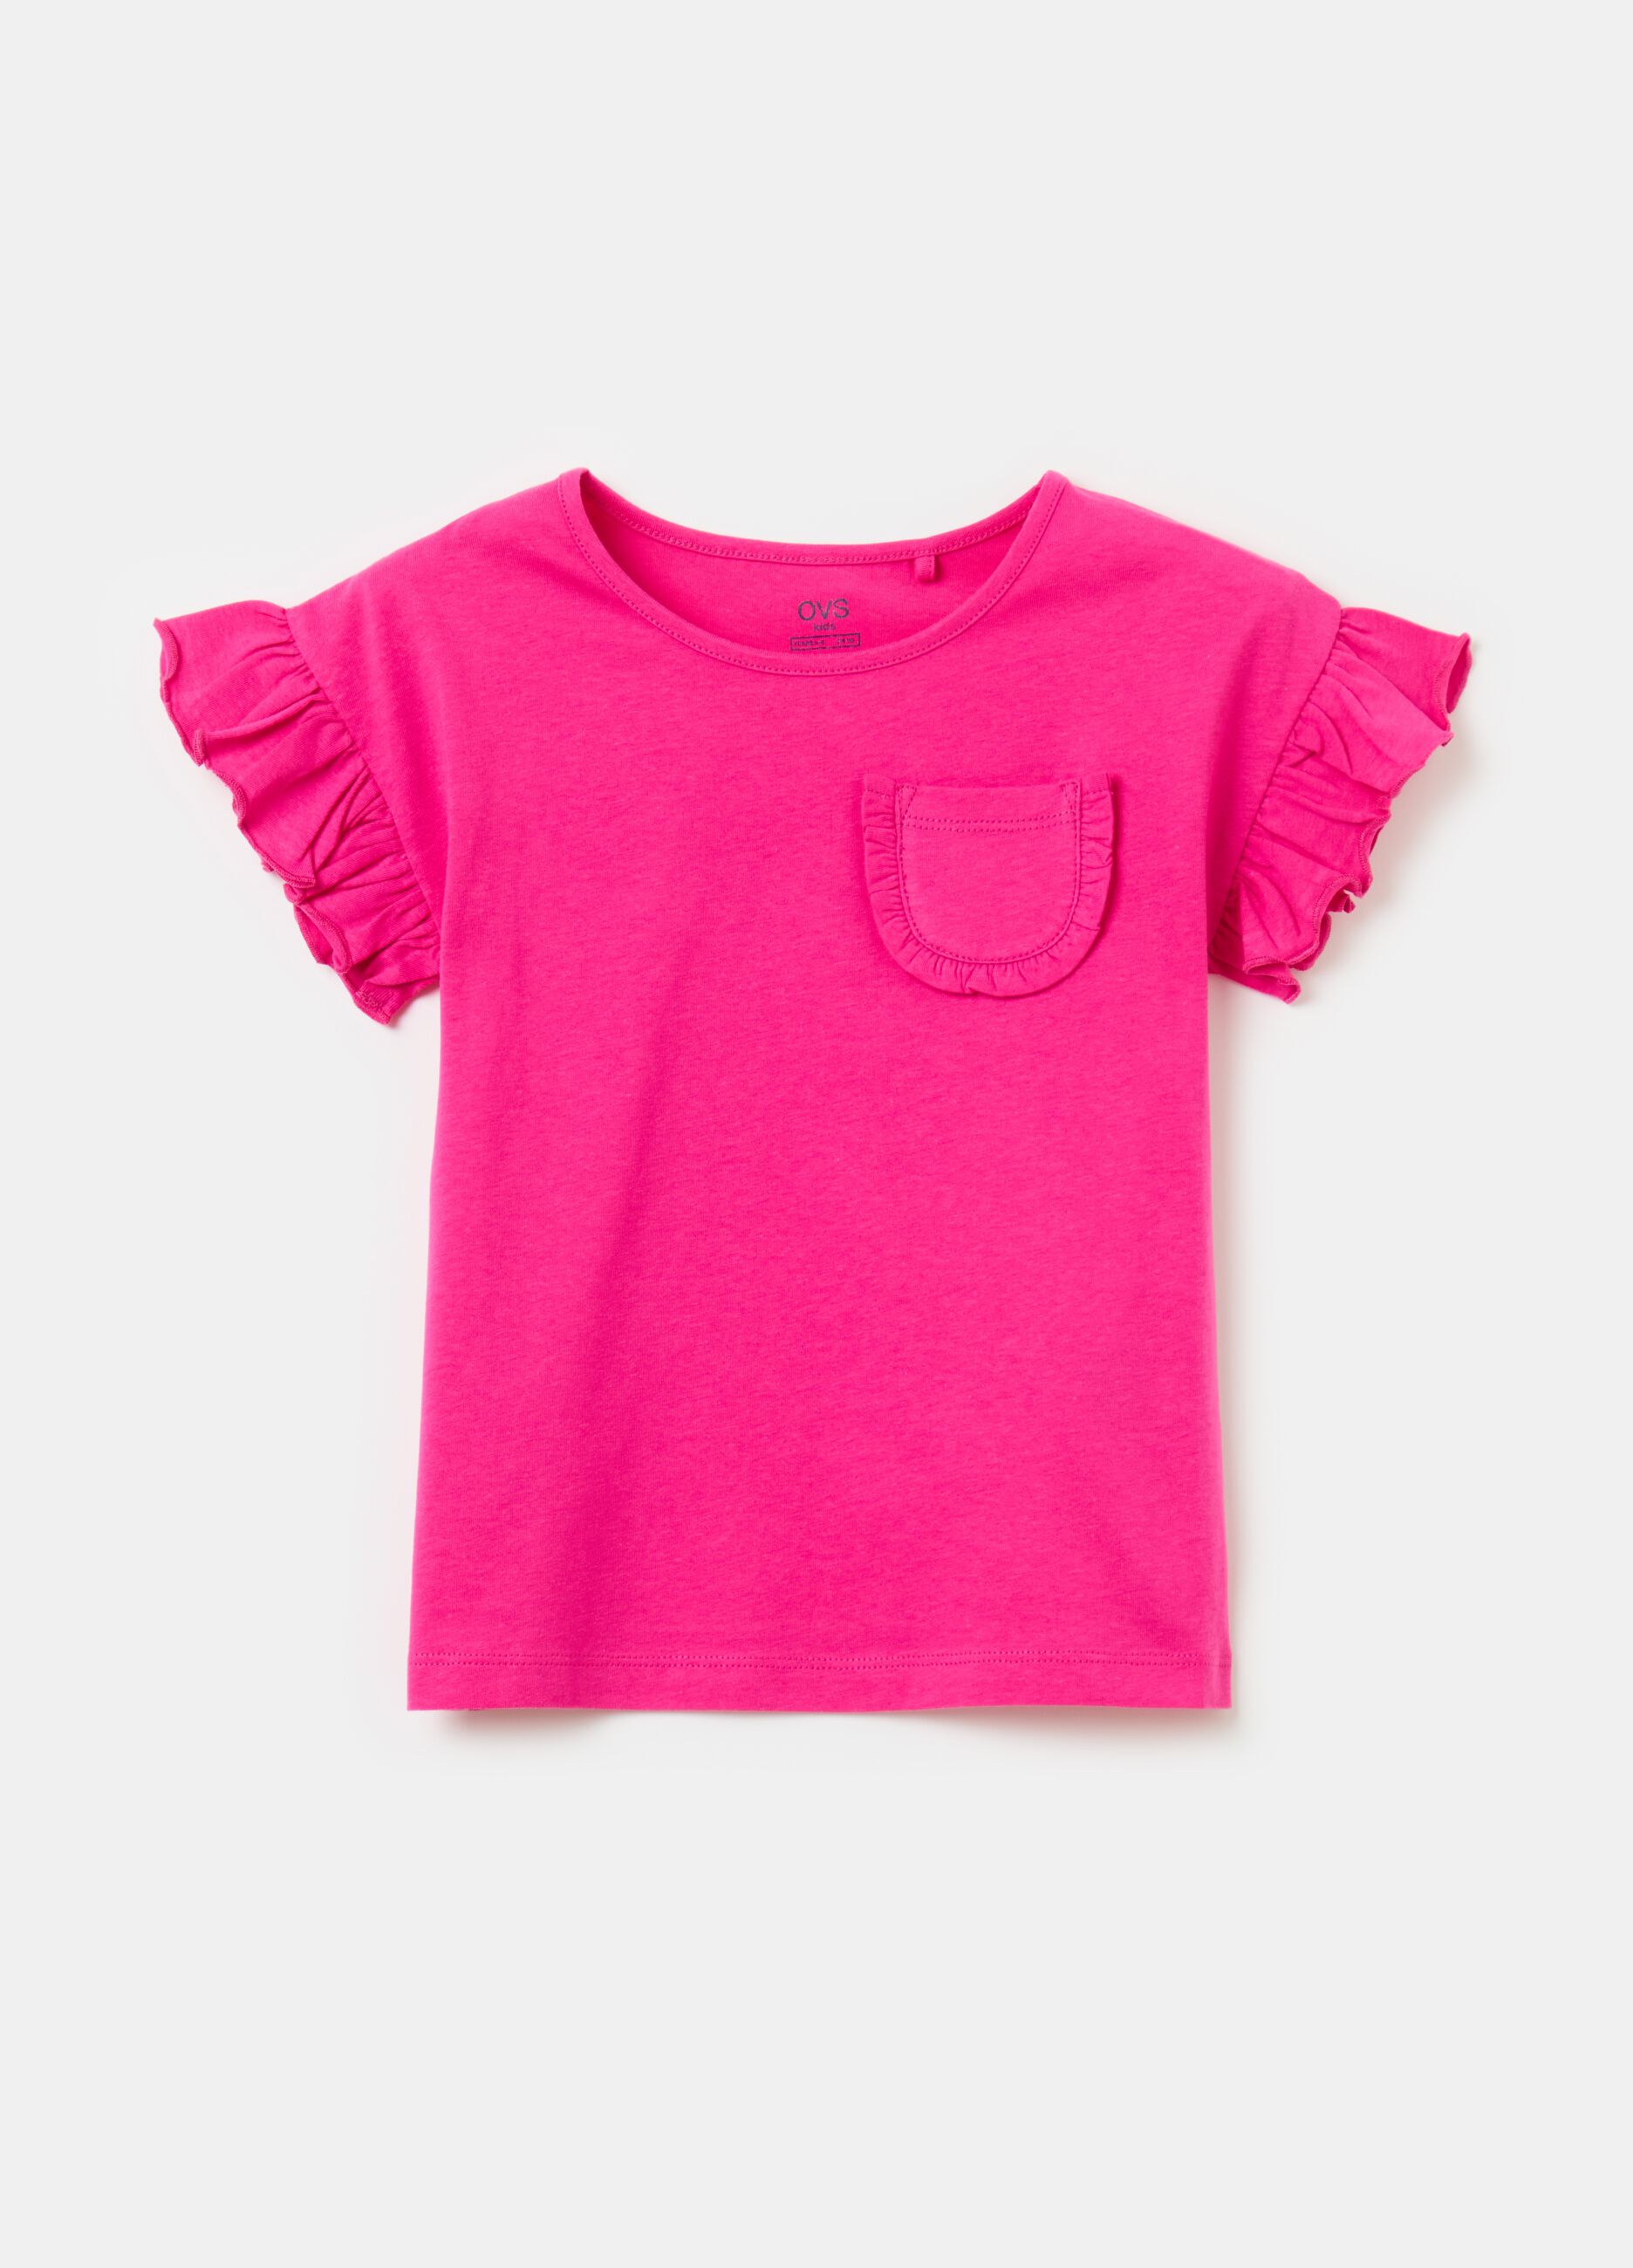 Cotton T-shirt with small pocket and frills